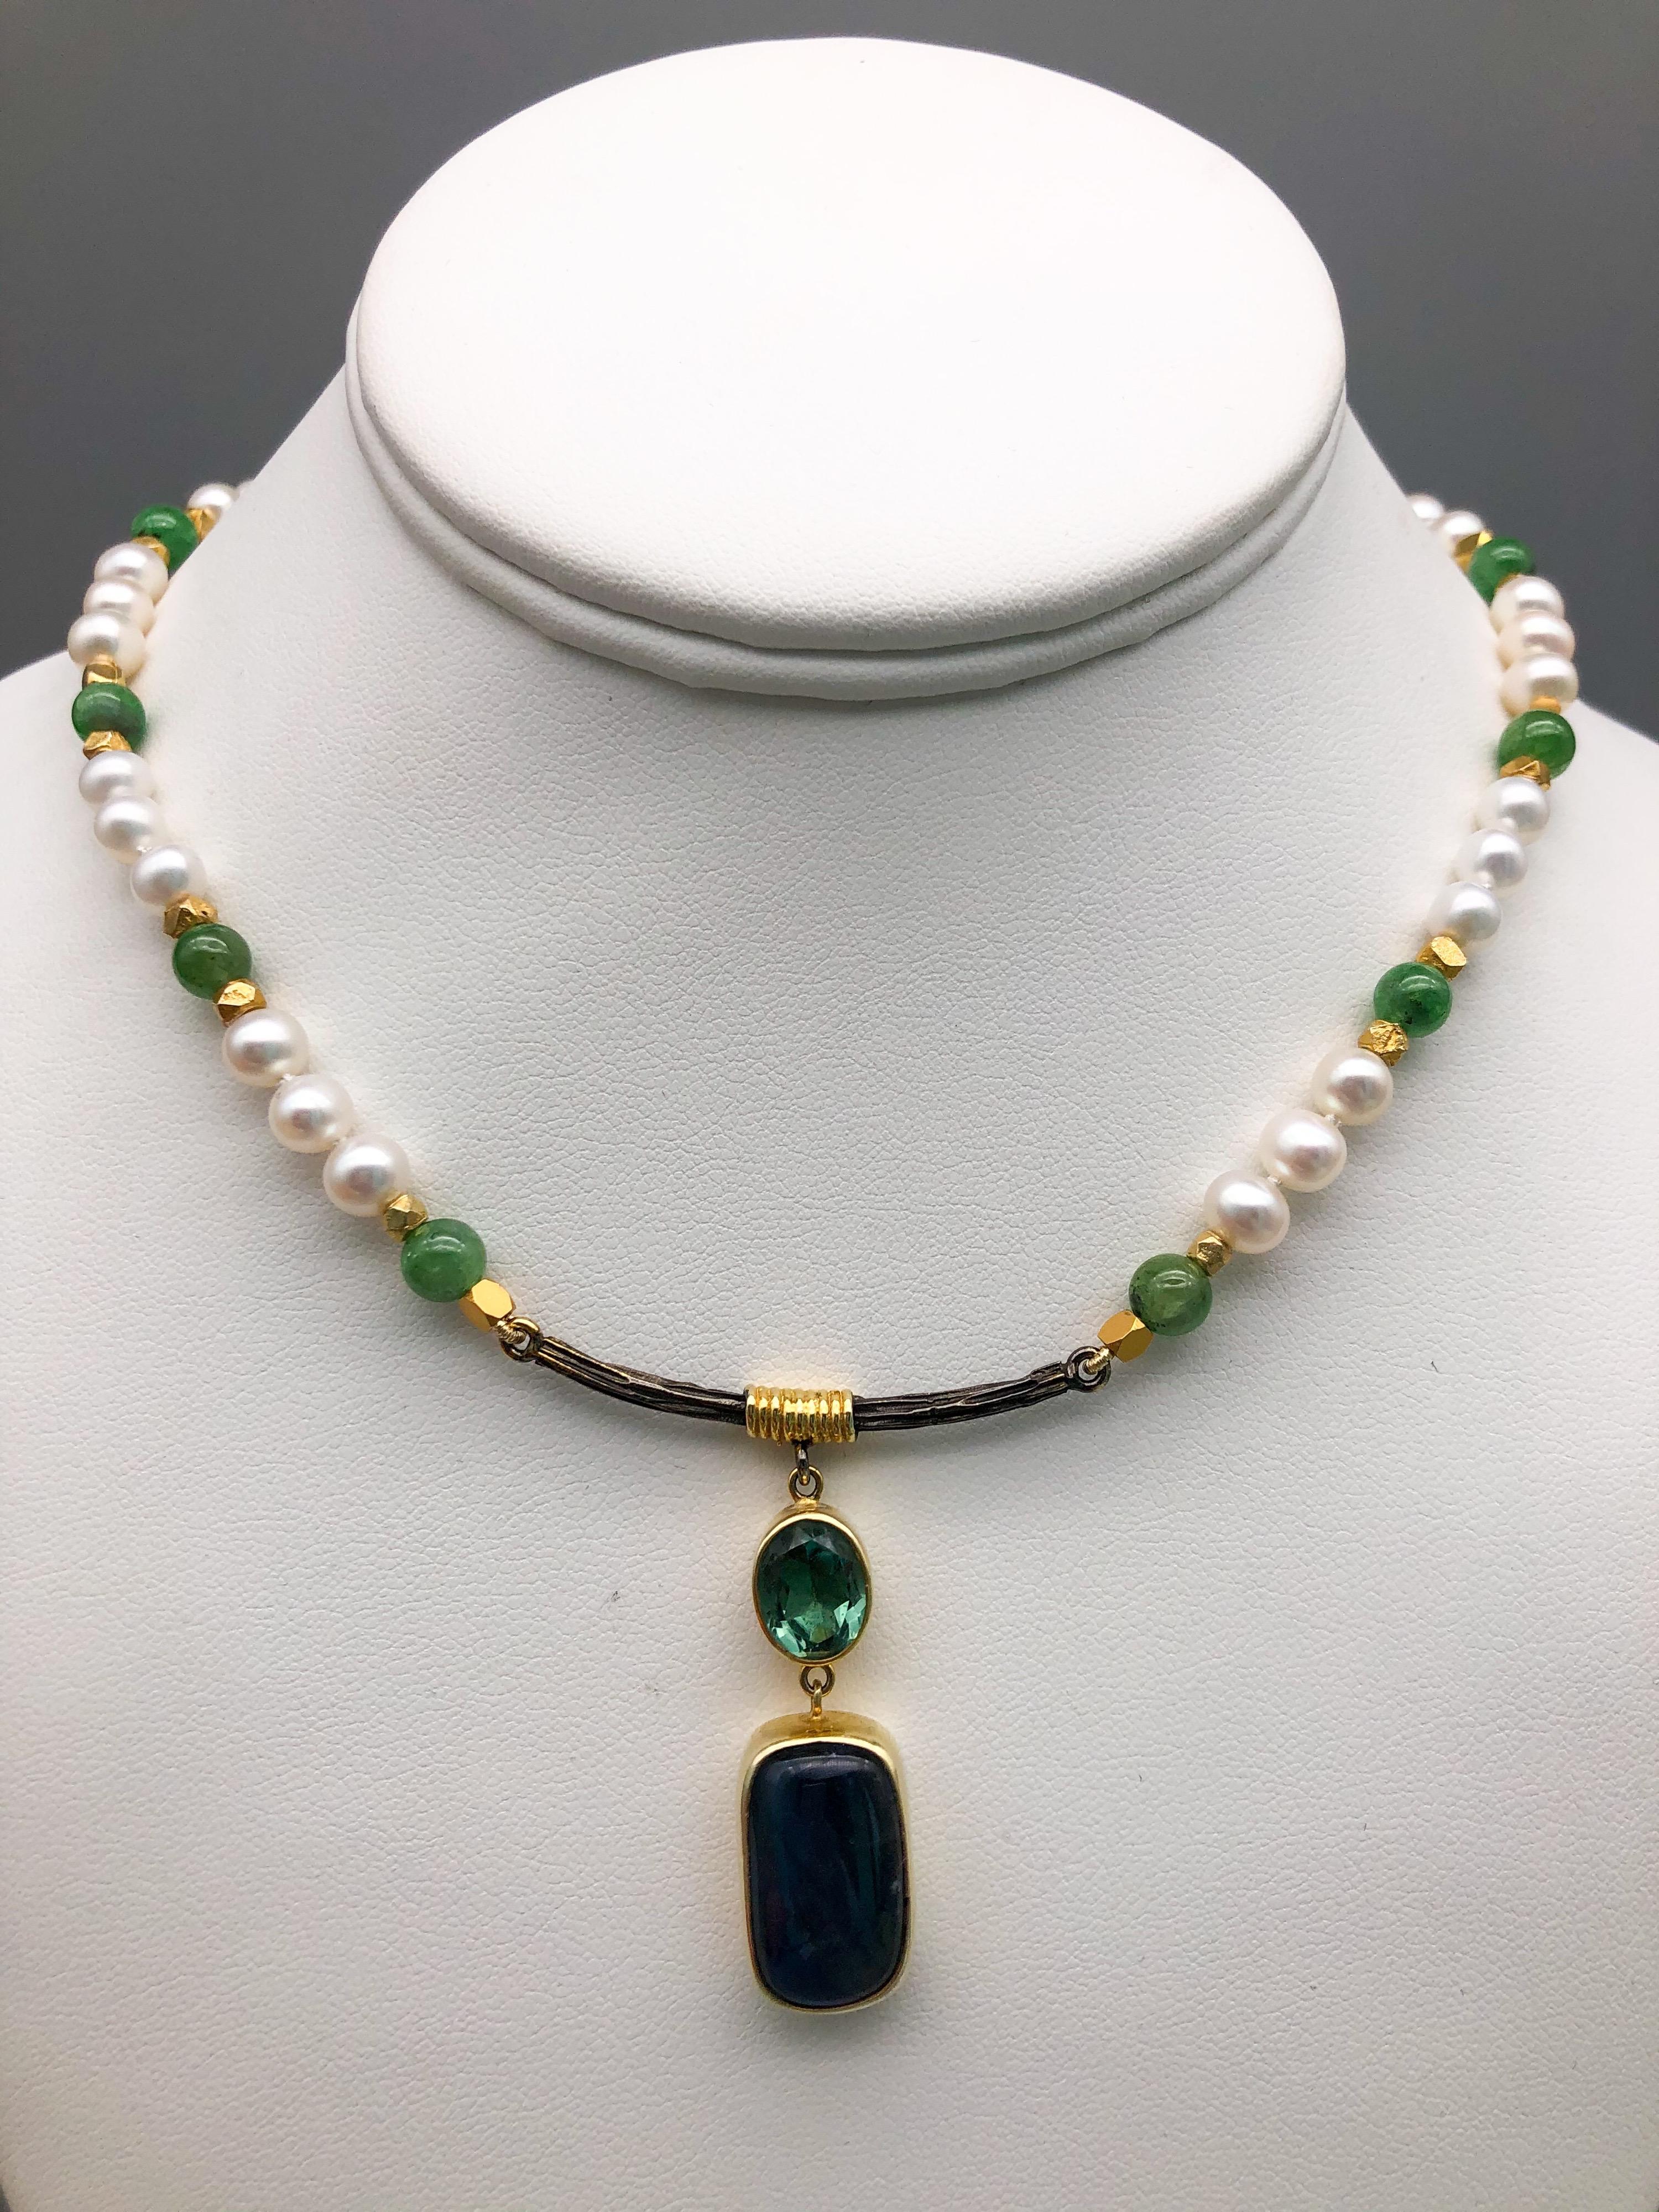 One-of-a-Kind
Just when you are looking for something that is a fresh take on a single strand necklace we teams up with a “Bora “design to bring you a really flattering necklace. Strand is Pearl and Emerald beads surrounding a pendant of Labradorite